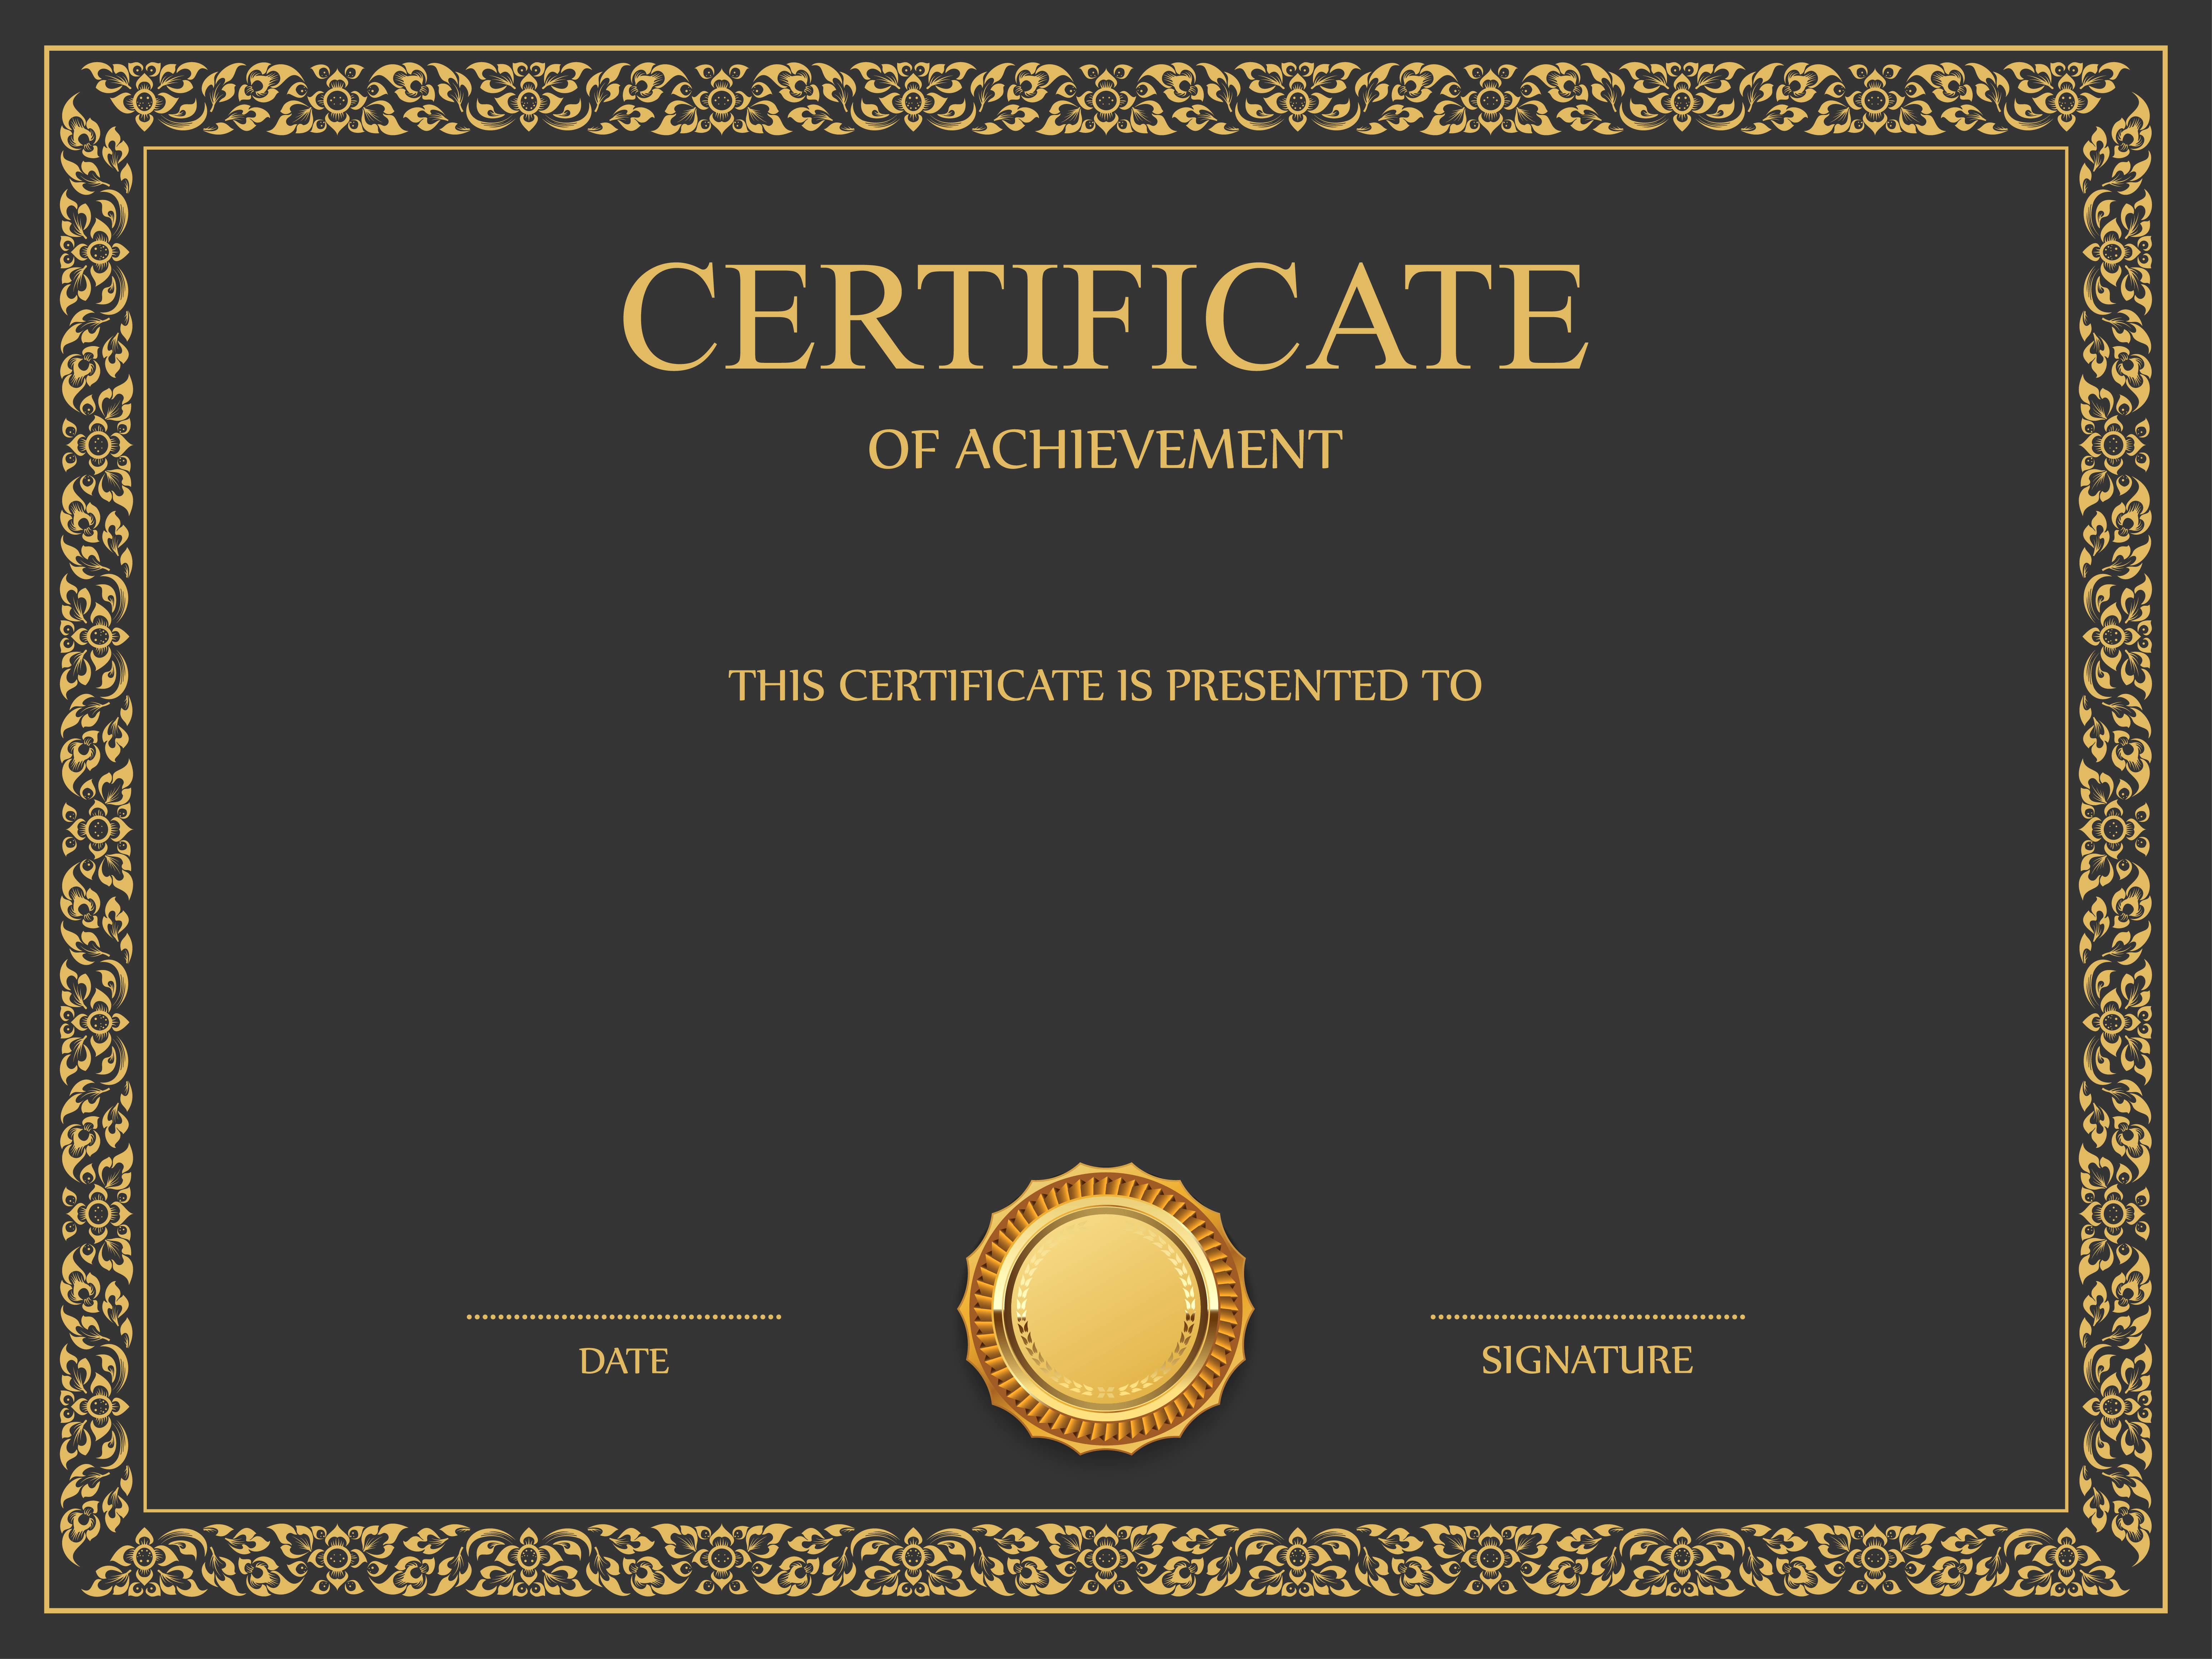 Certificate Template PNG Image PurePNG Free Transparent CC0 PNG 